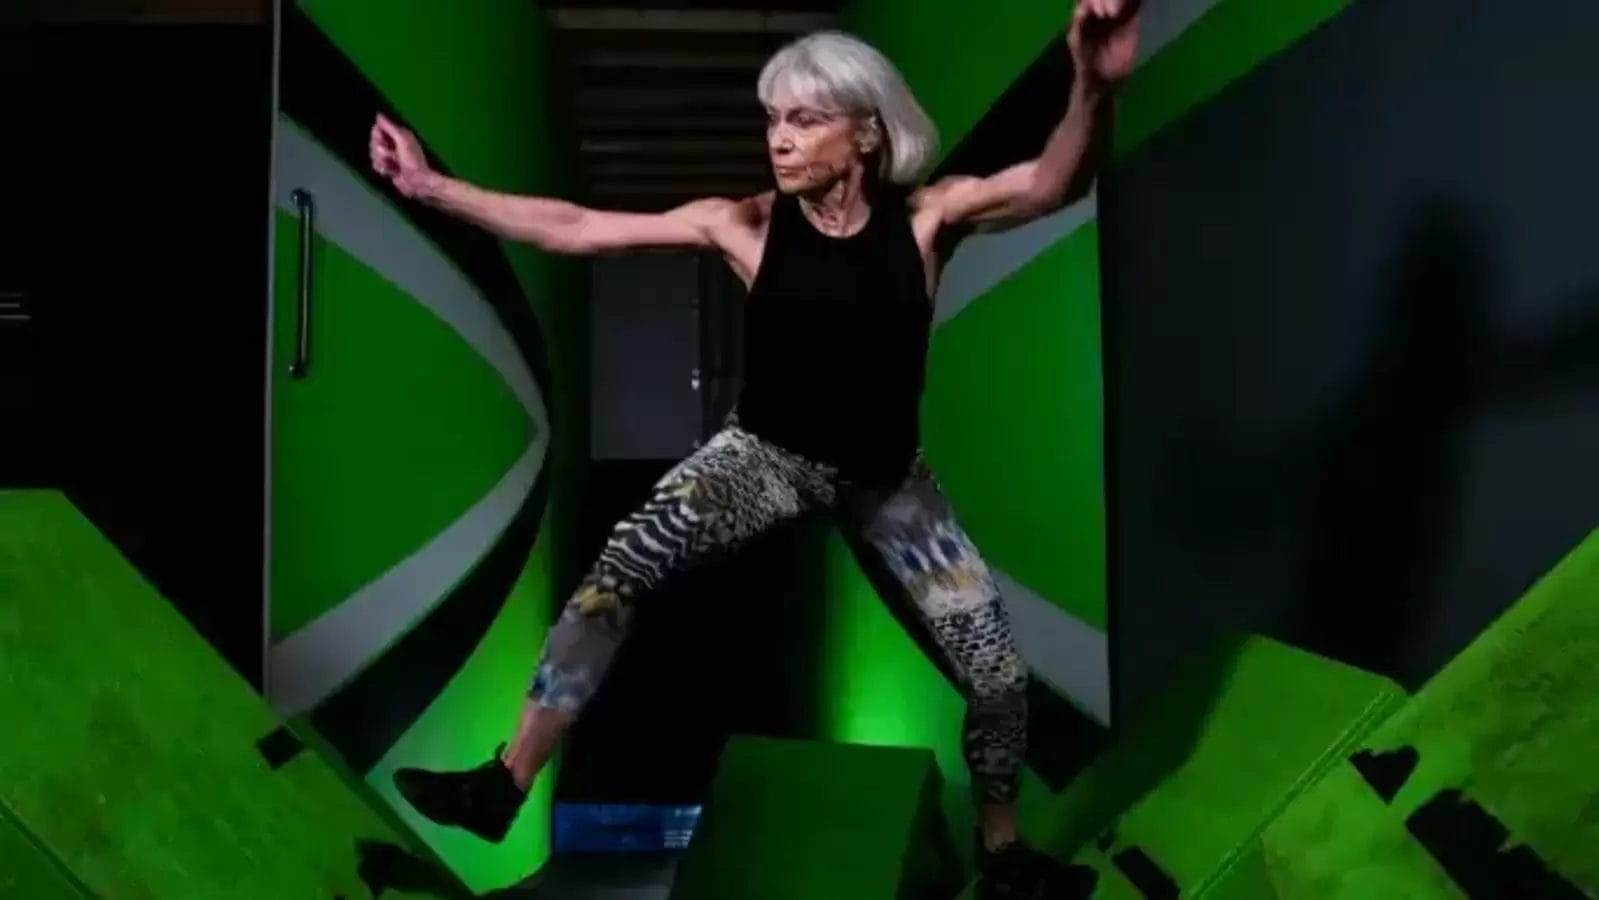 71-year-old US woman bags the title of ‘oldest female ninja’